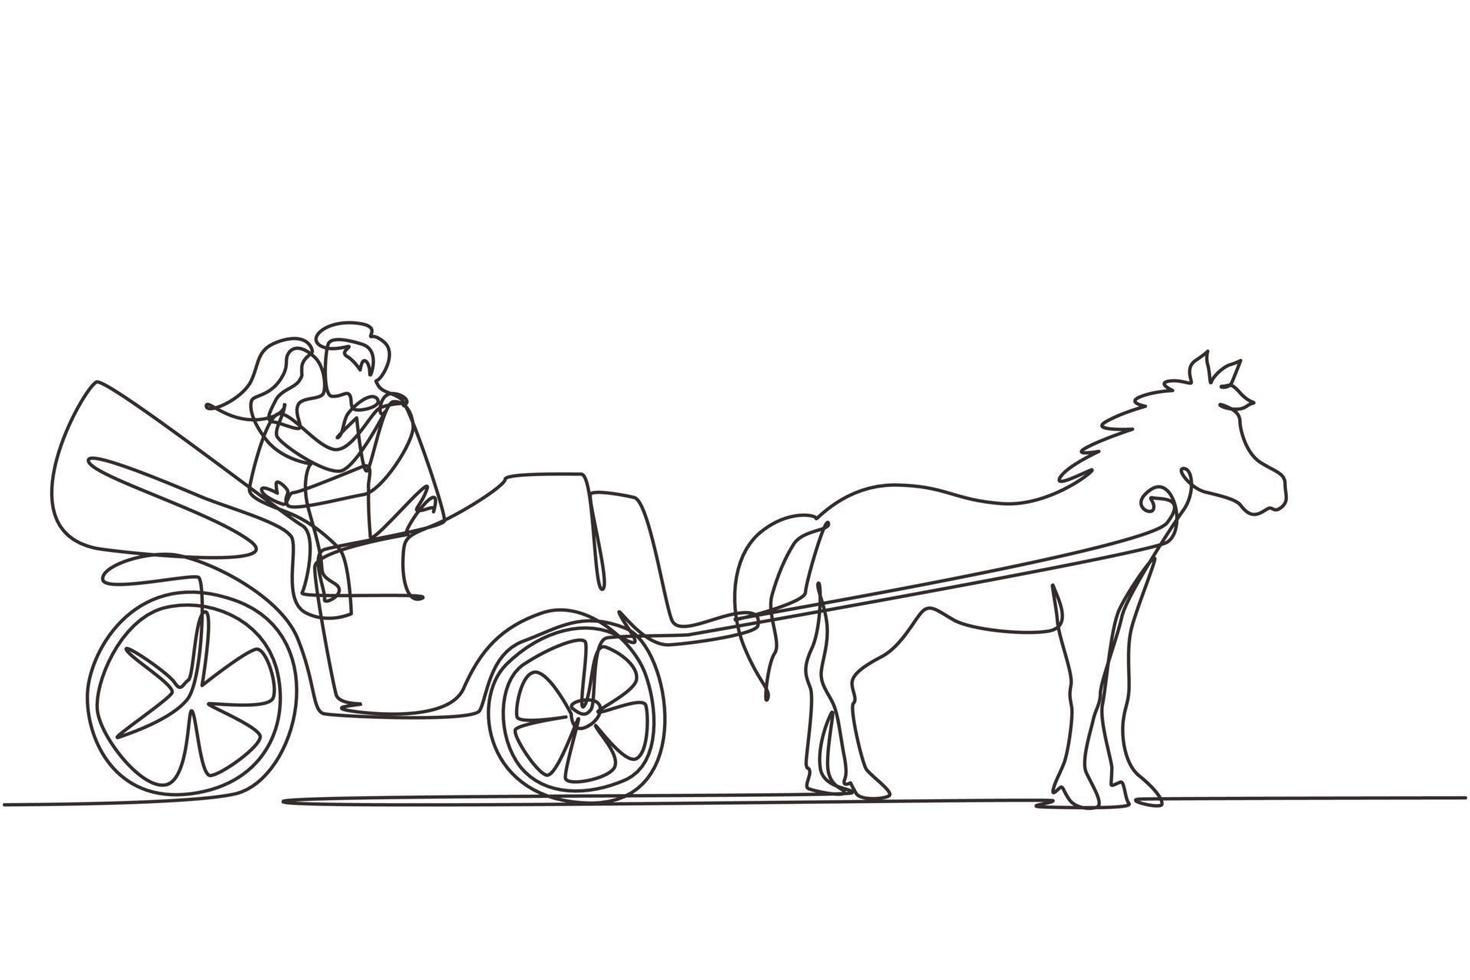 Single one line drawing wedding couple trying kiss each other. Just married. Happiness bride and groom sitting in carriage pulled by horse. Continuous line draw design graphic vector illustration